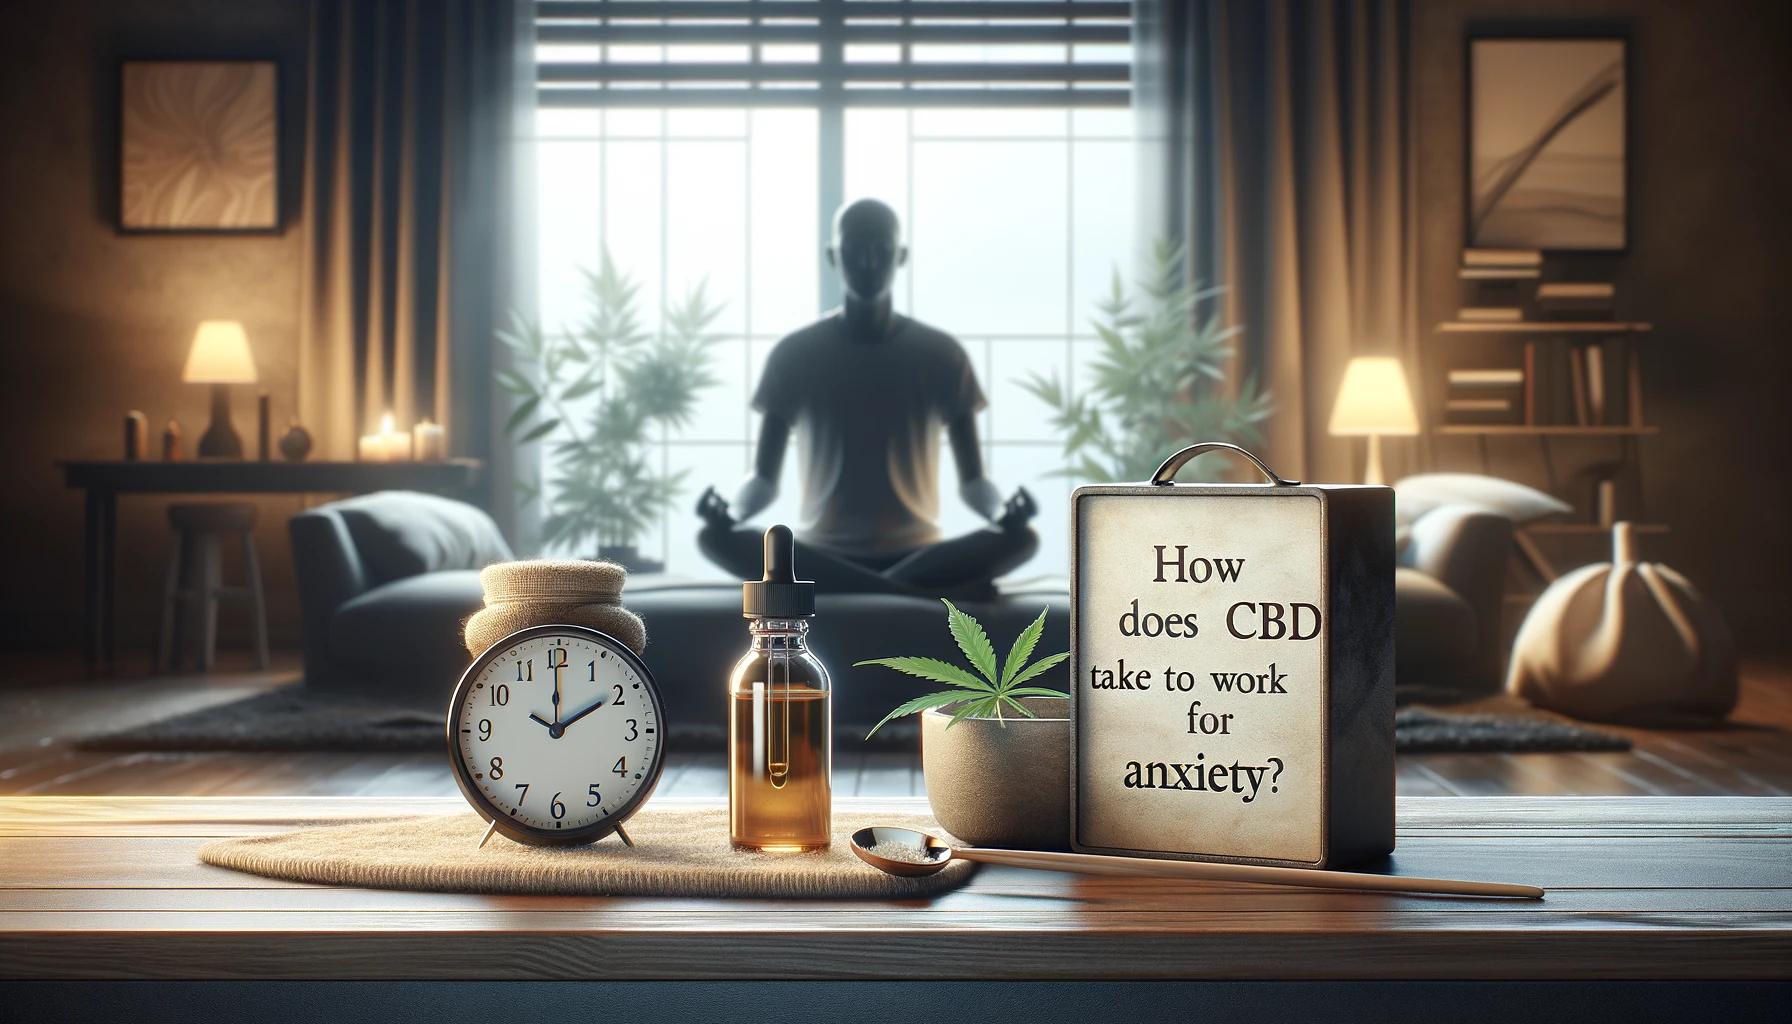 How Long Does CBD Oil Take To Work for Anxiety